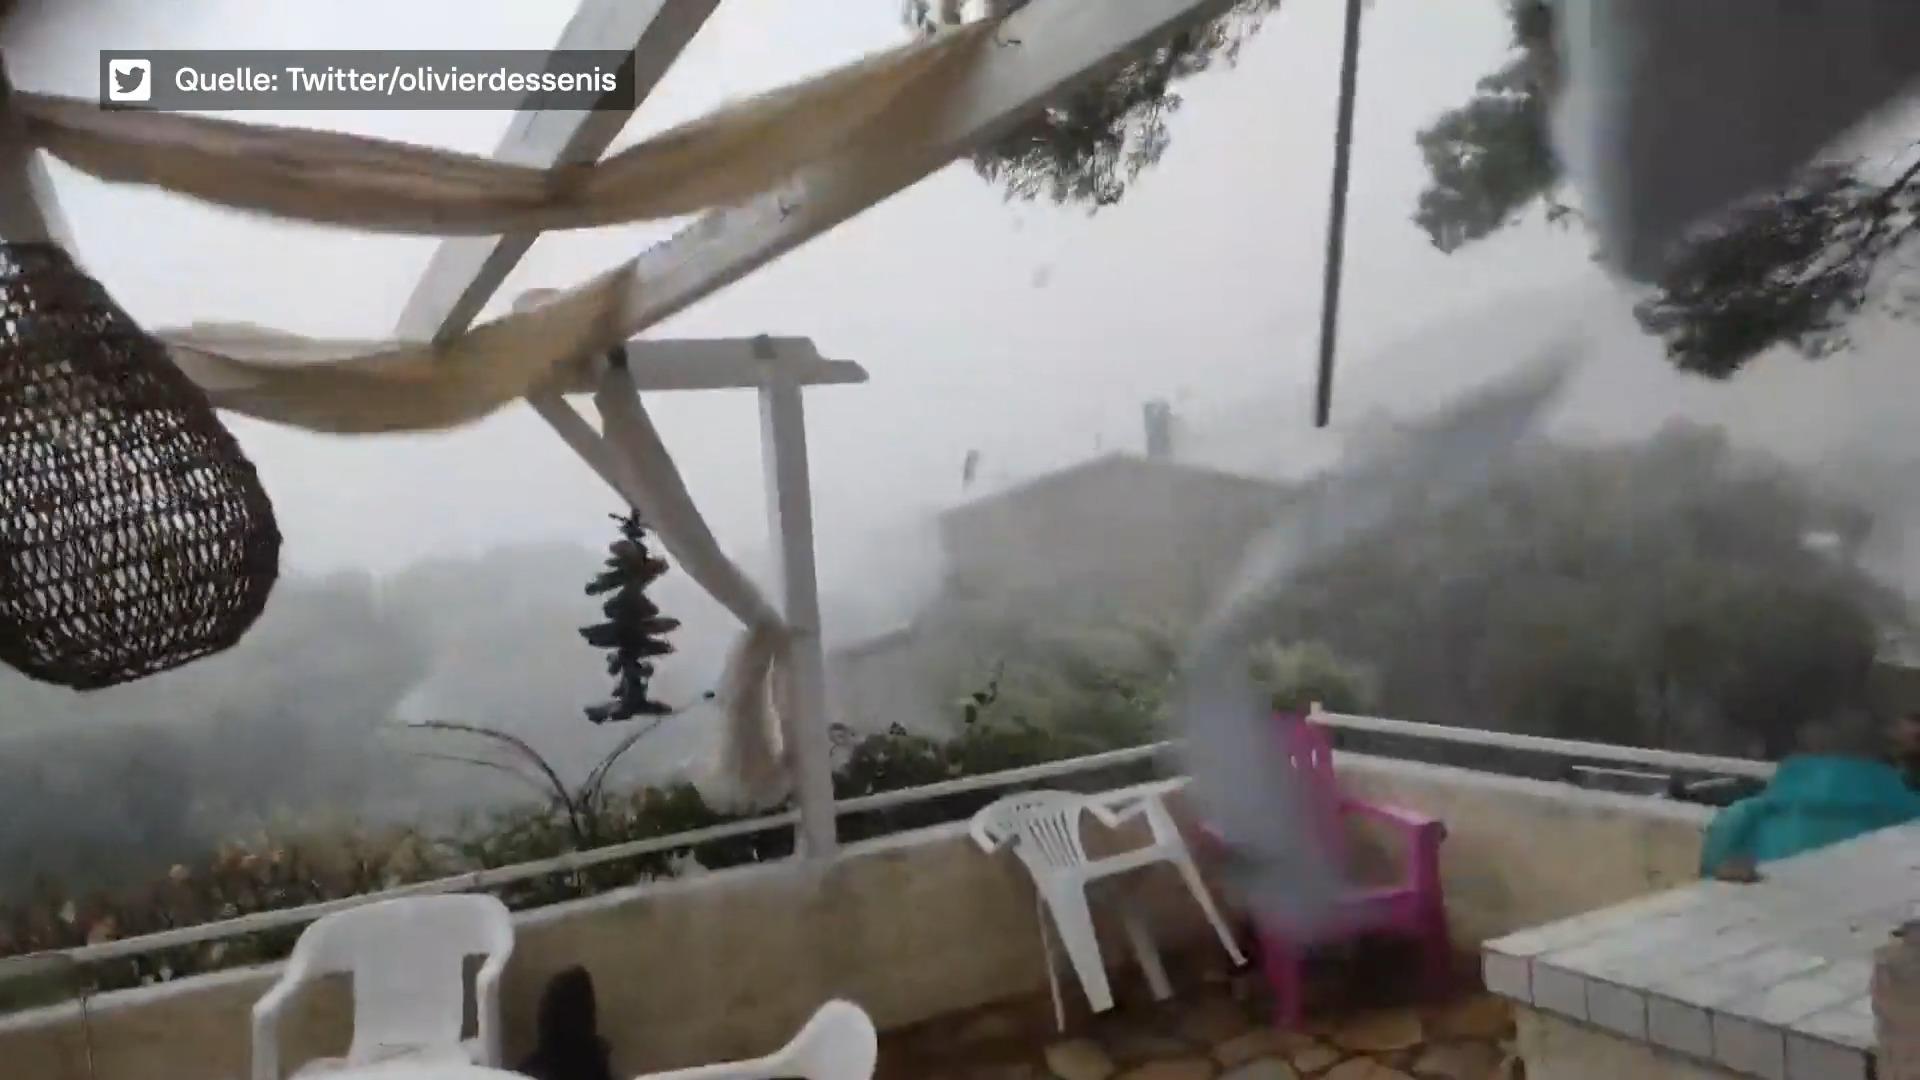 Crazy photos of bad storm deaths in storms in Corsica and Italy